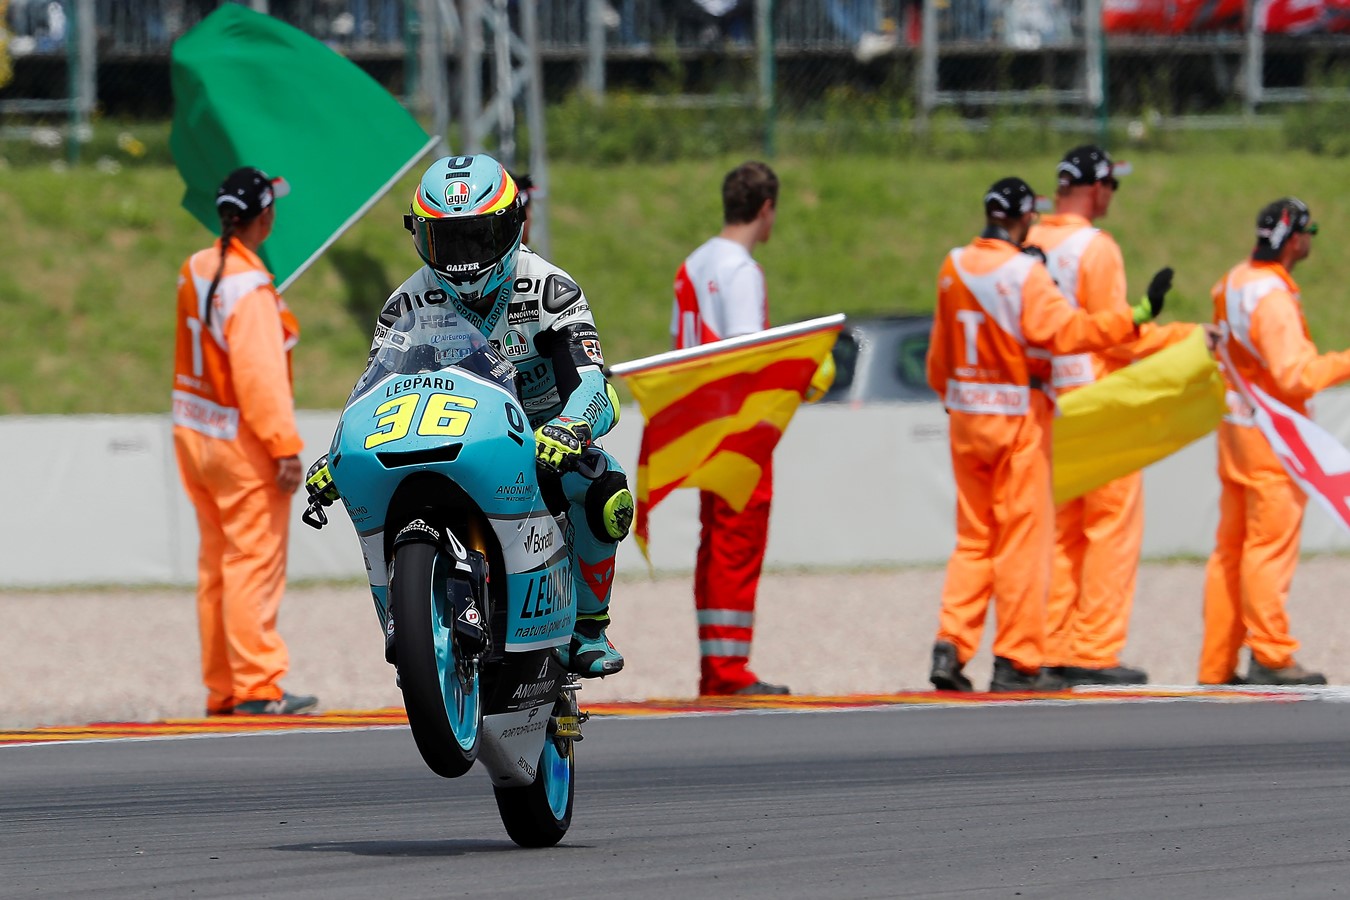 Joan Mir wins thrilling three-way contest for Moto3 victory